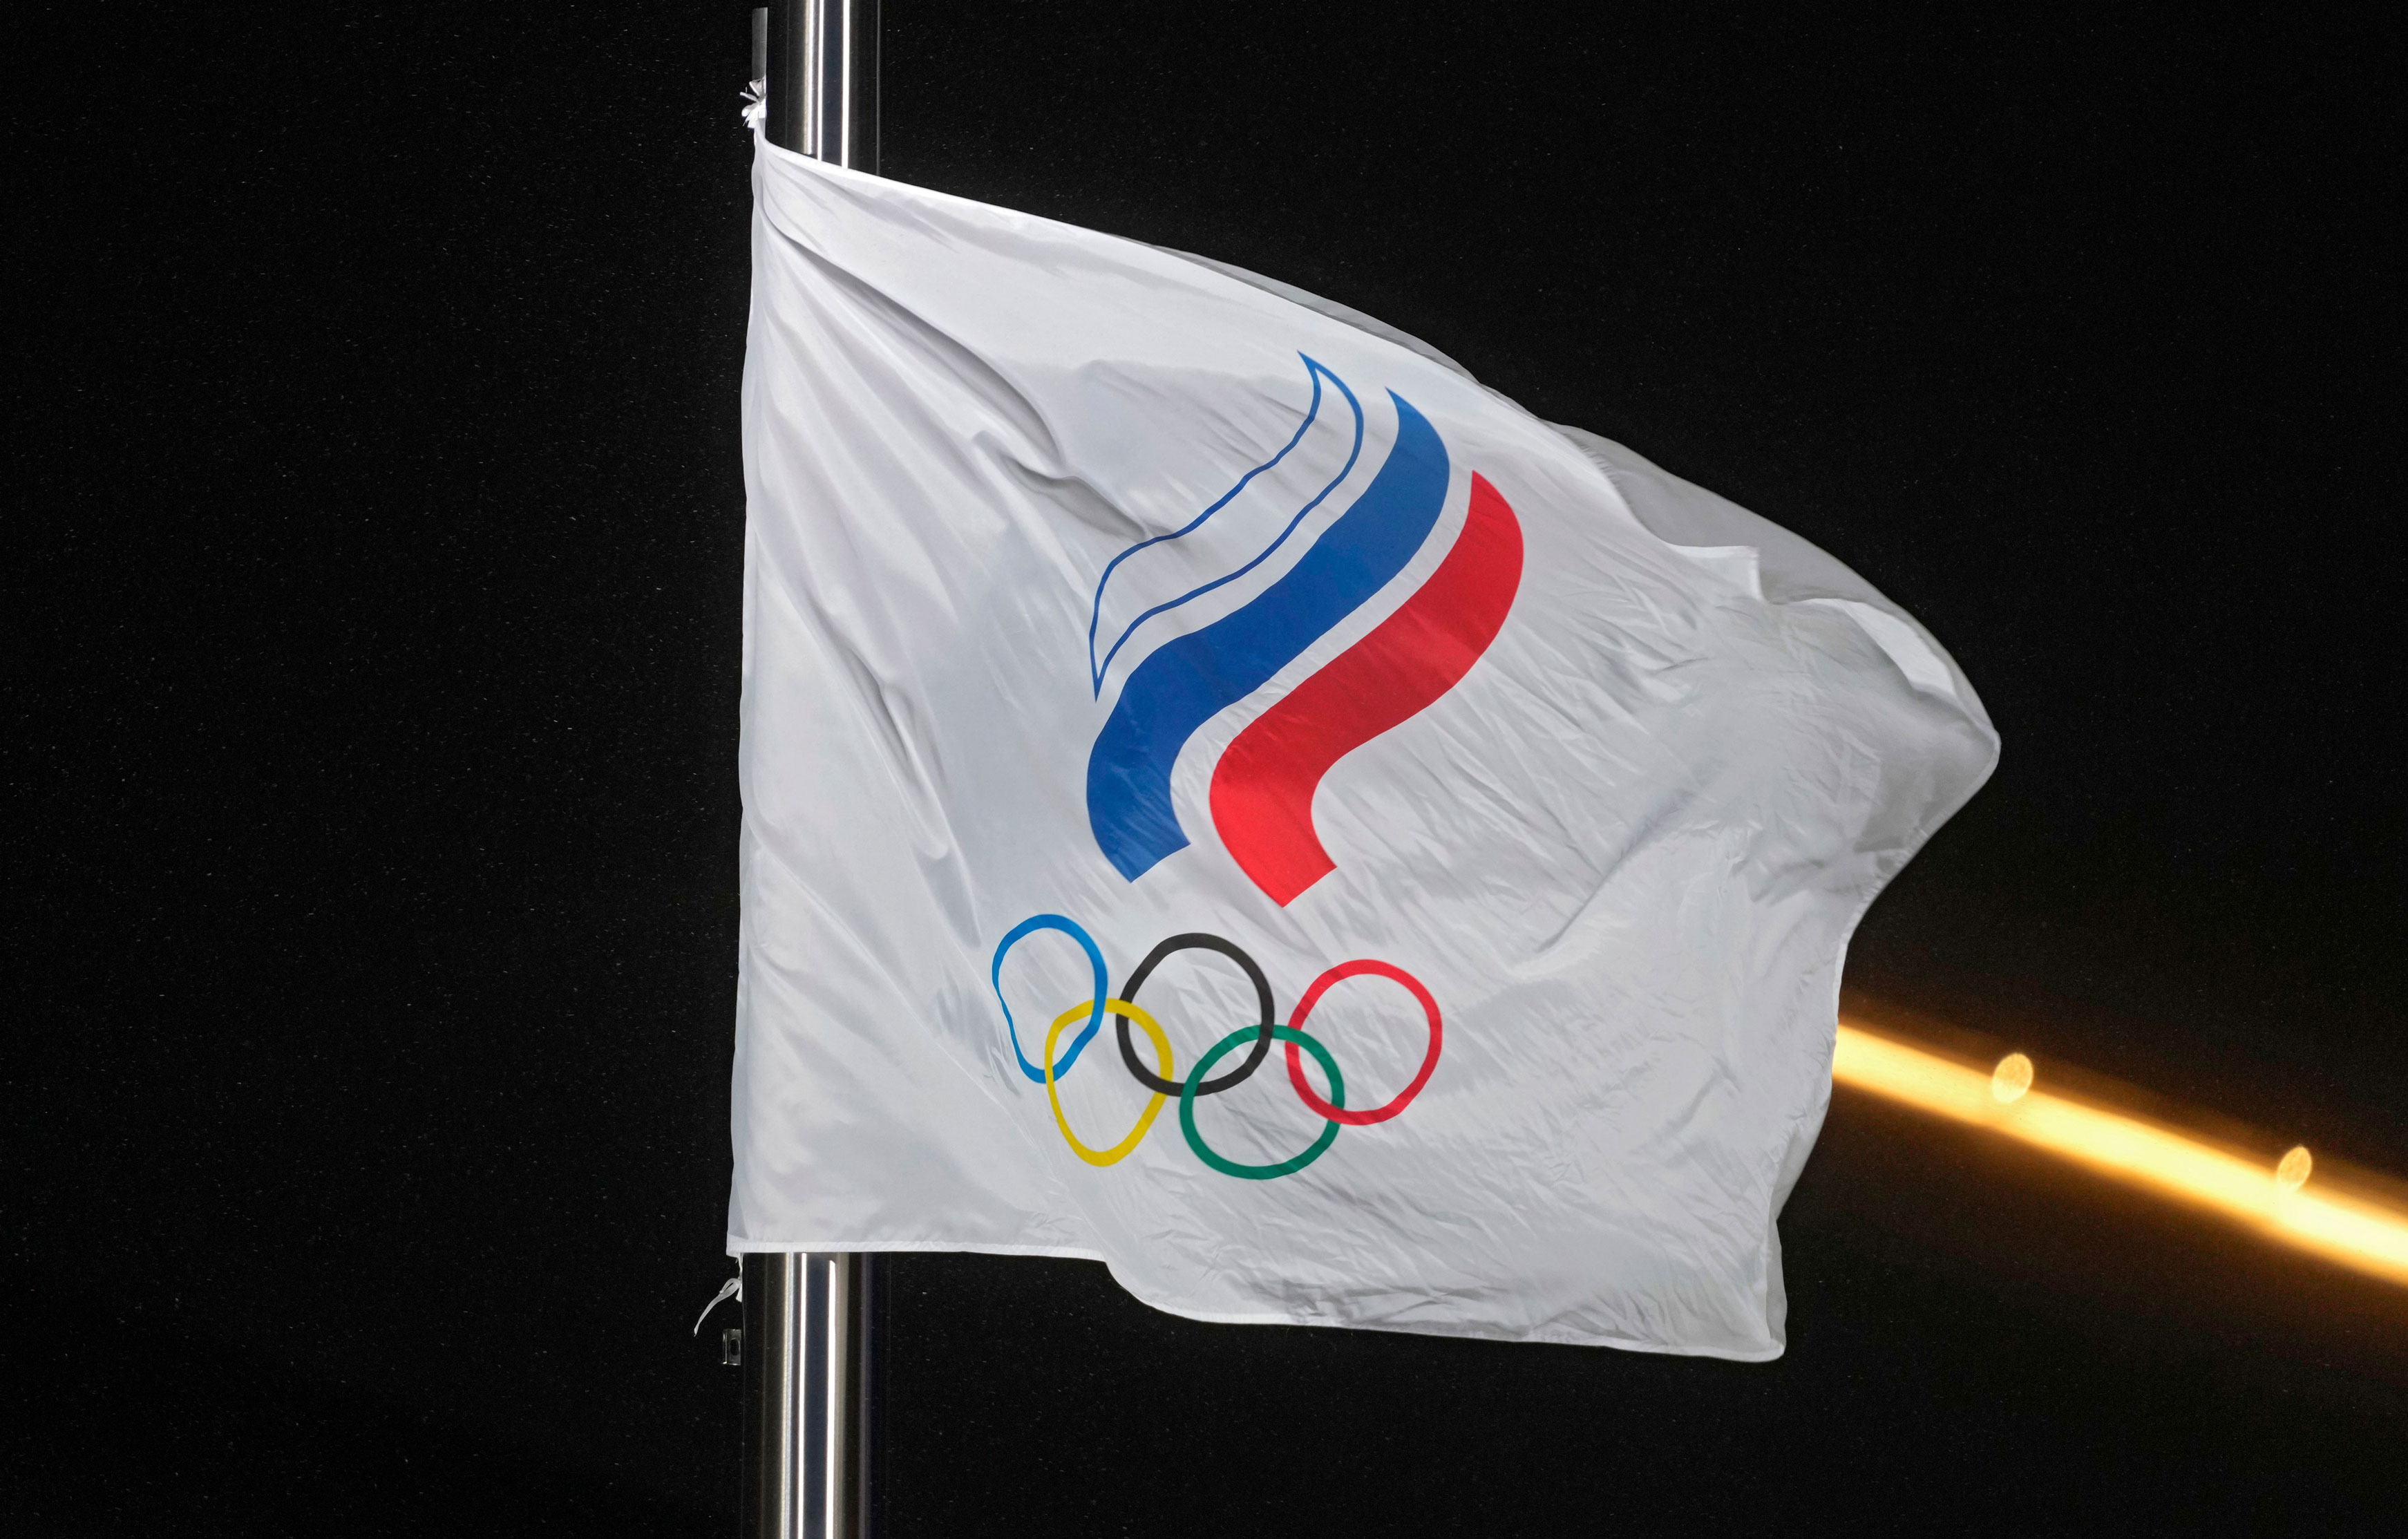 The flag of the Russian Olympic Committee flies during an award ceremony on Feb. 13.